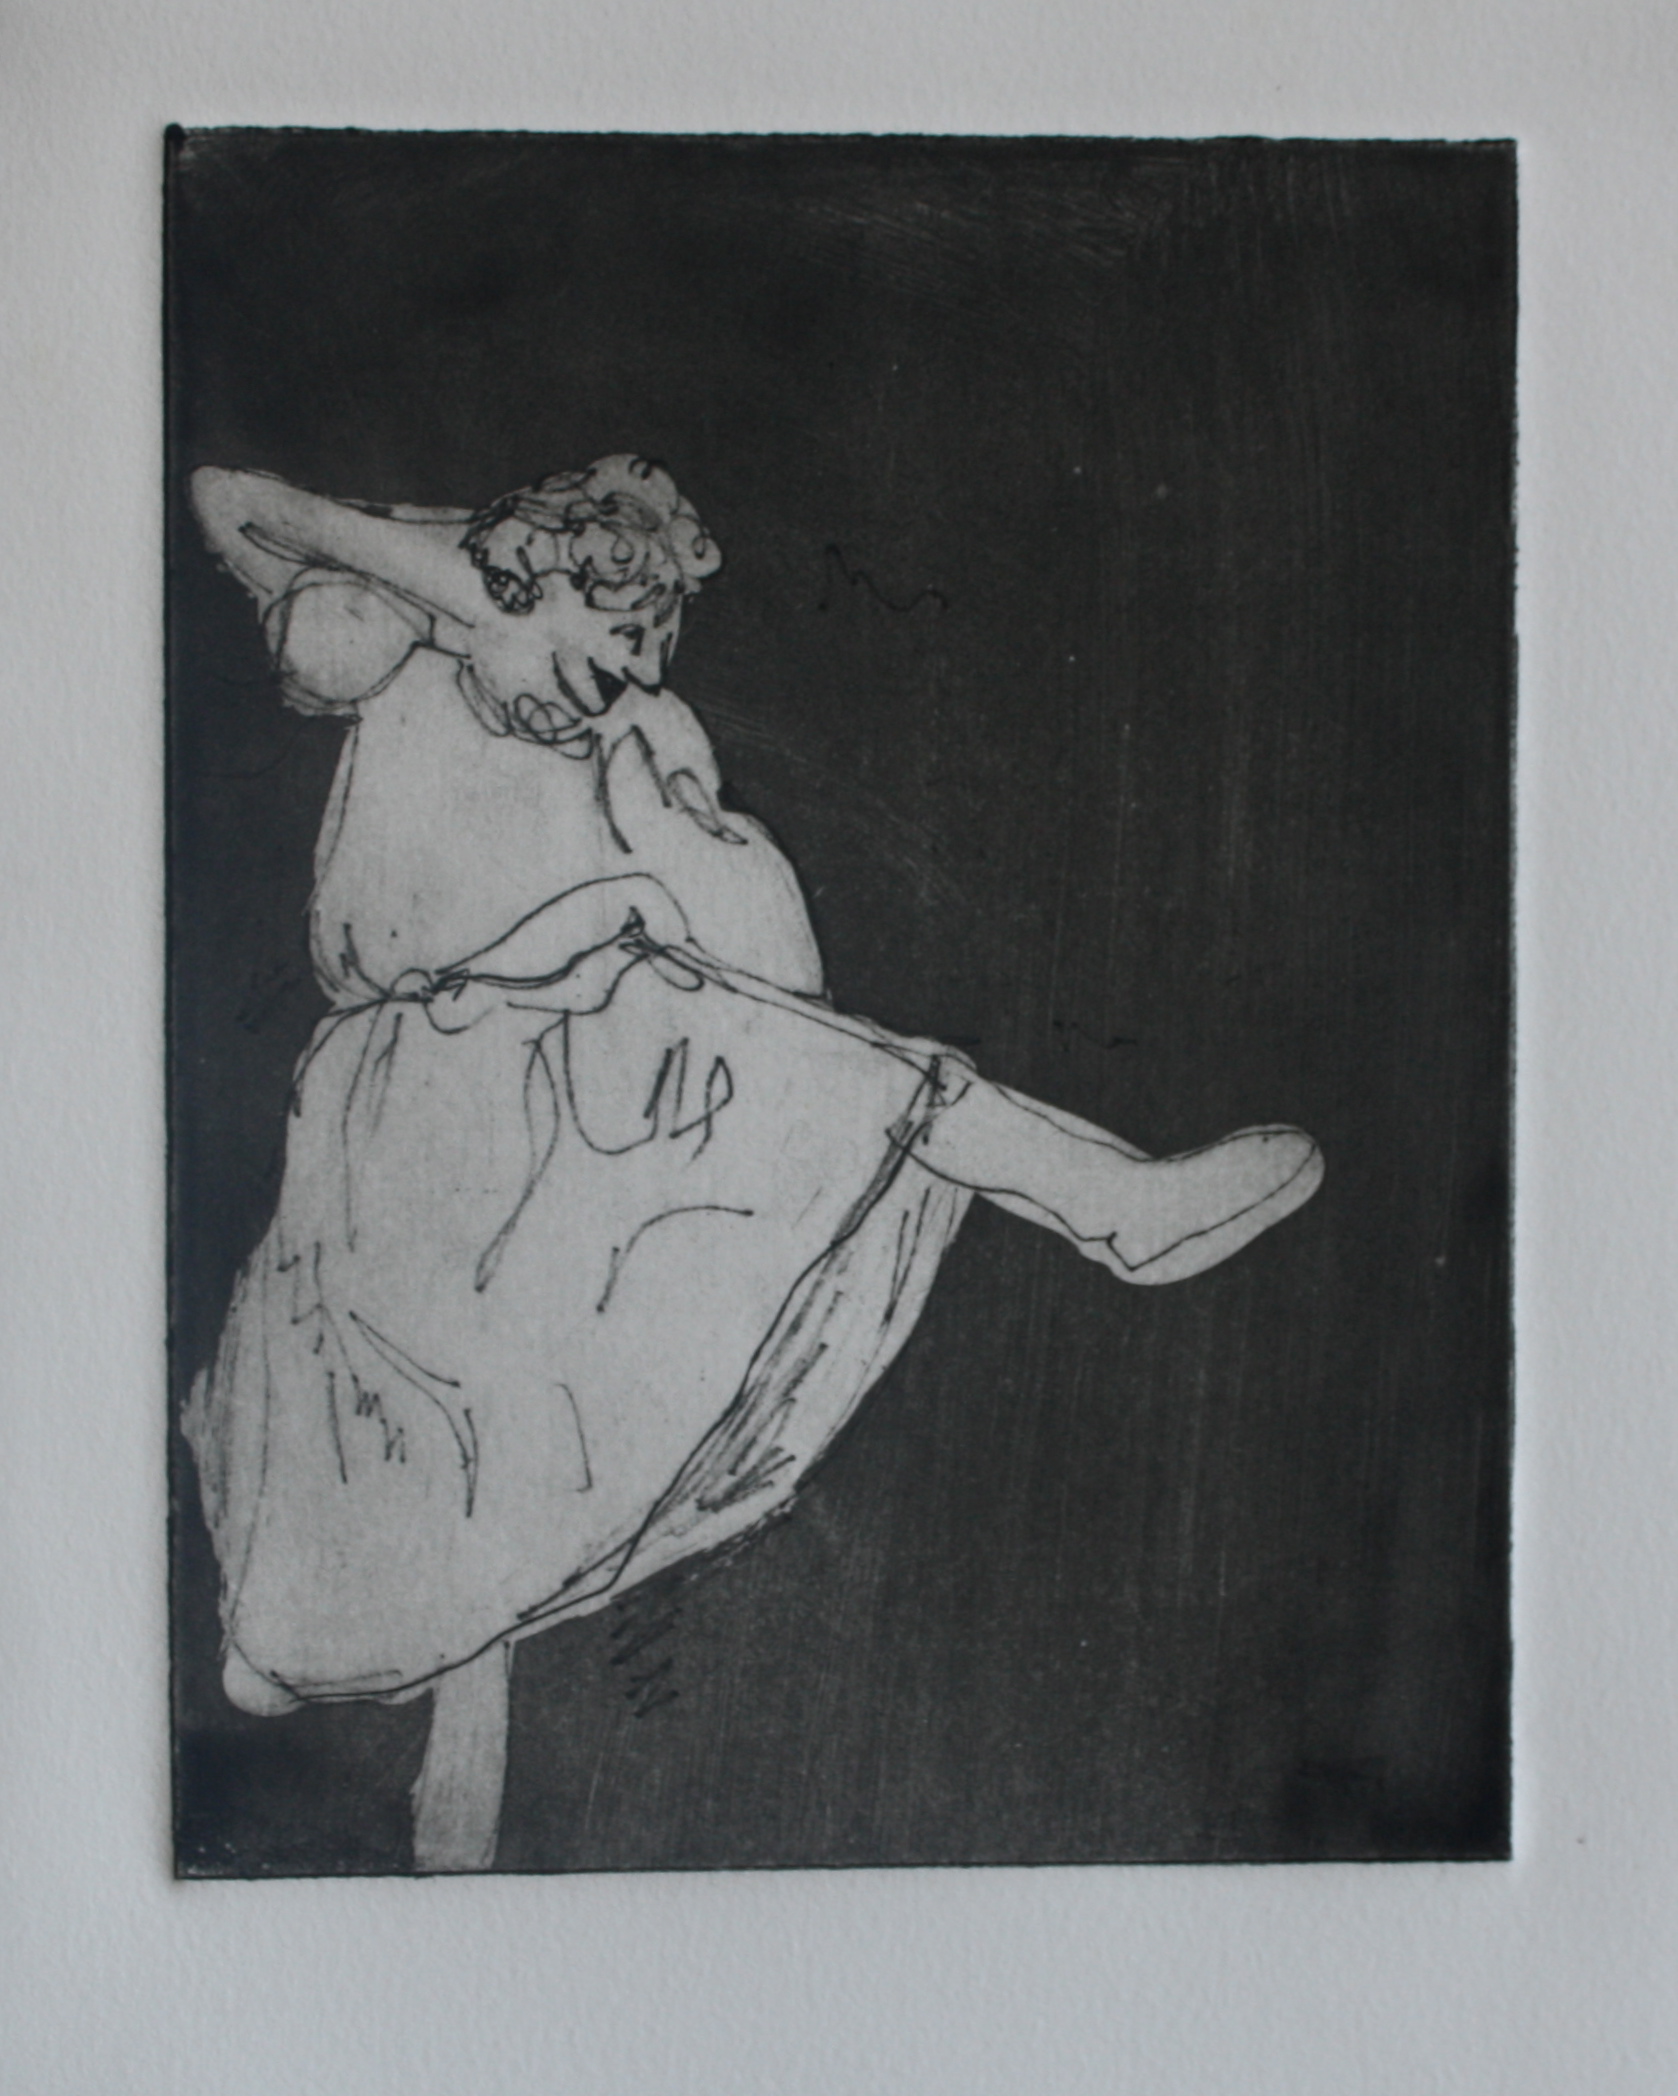  Kick It, Edition of Three  Etching on paper, image measures 5.25"x7" (unframed). 